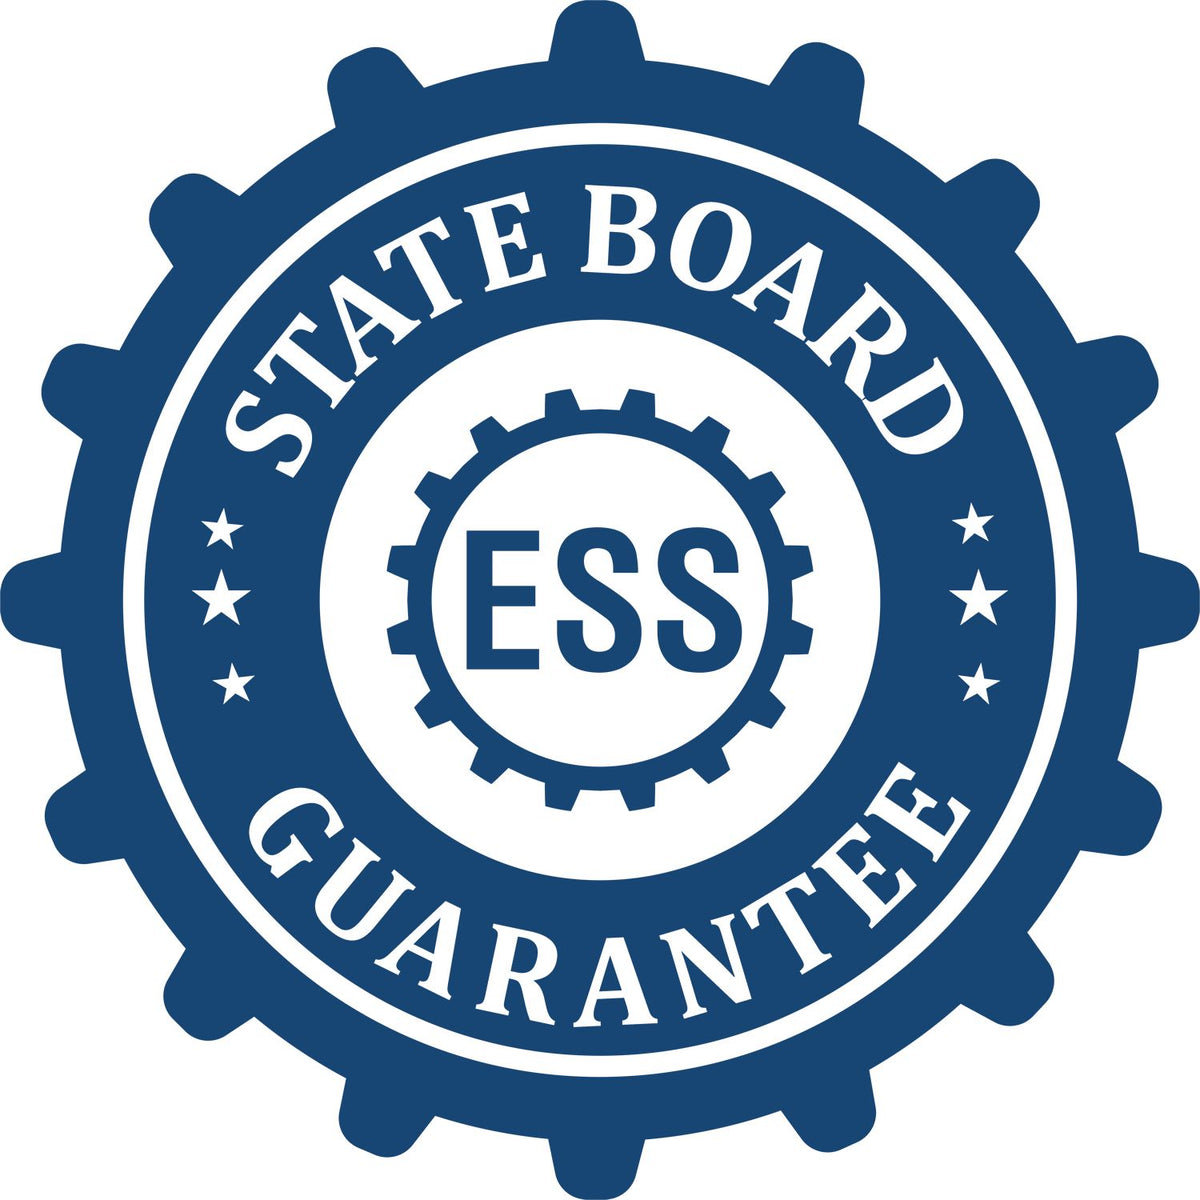 An emblem in a gear shape illustrating a state board guarantee for the Hybrid Pennsylvania Architect Seal